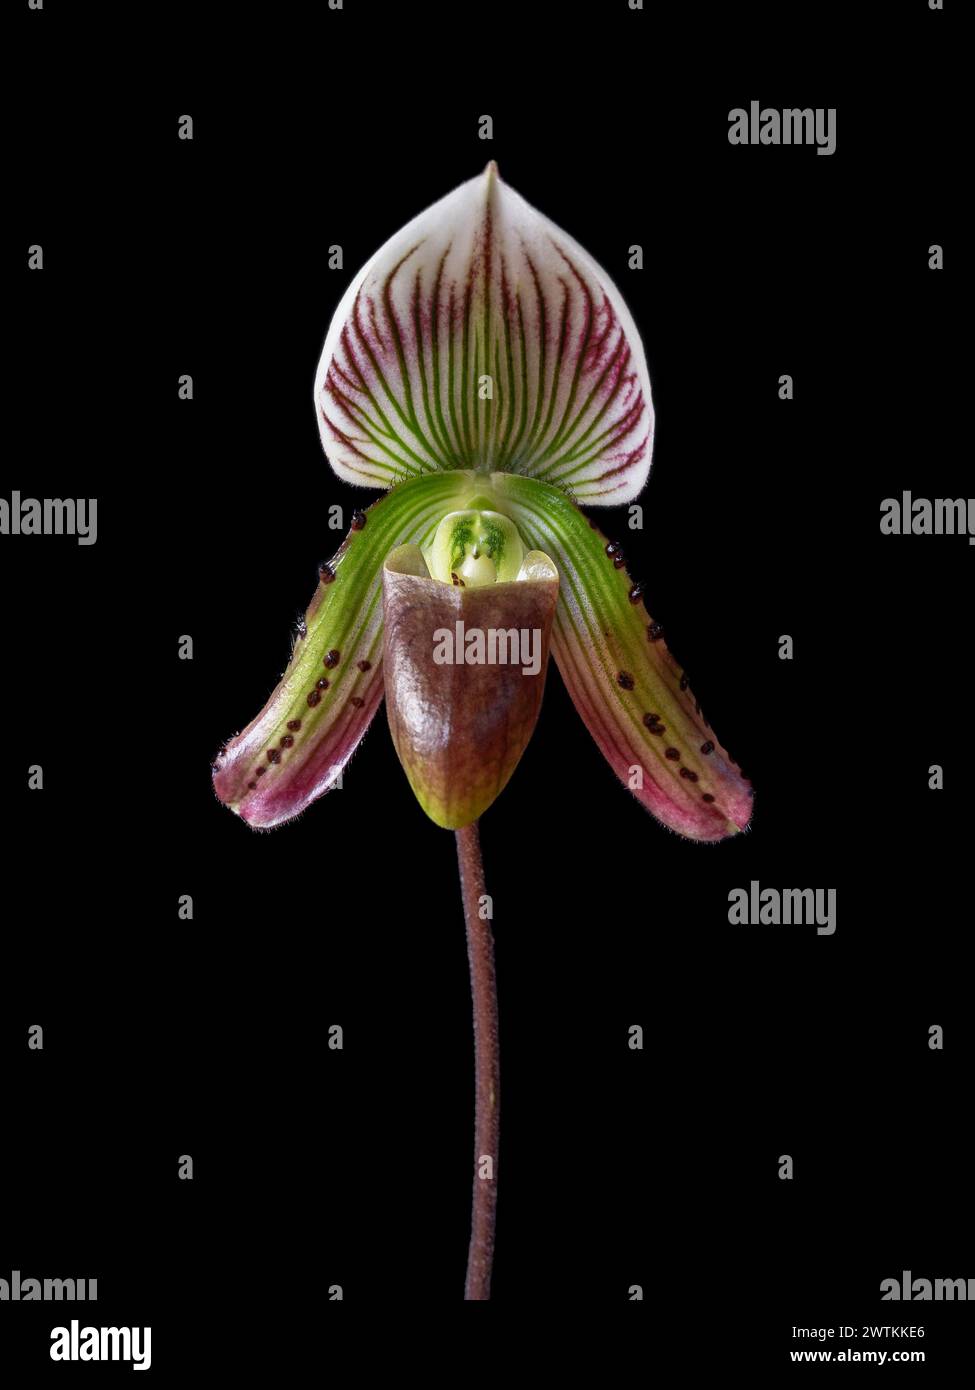 Closeup view of bright purple green and white flower of blooming lady slipper orchid species paphiopedilum callosum isolated on black background Stock Photo